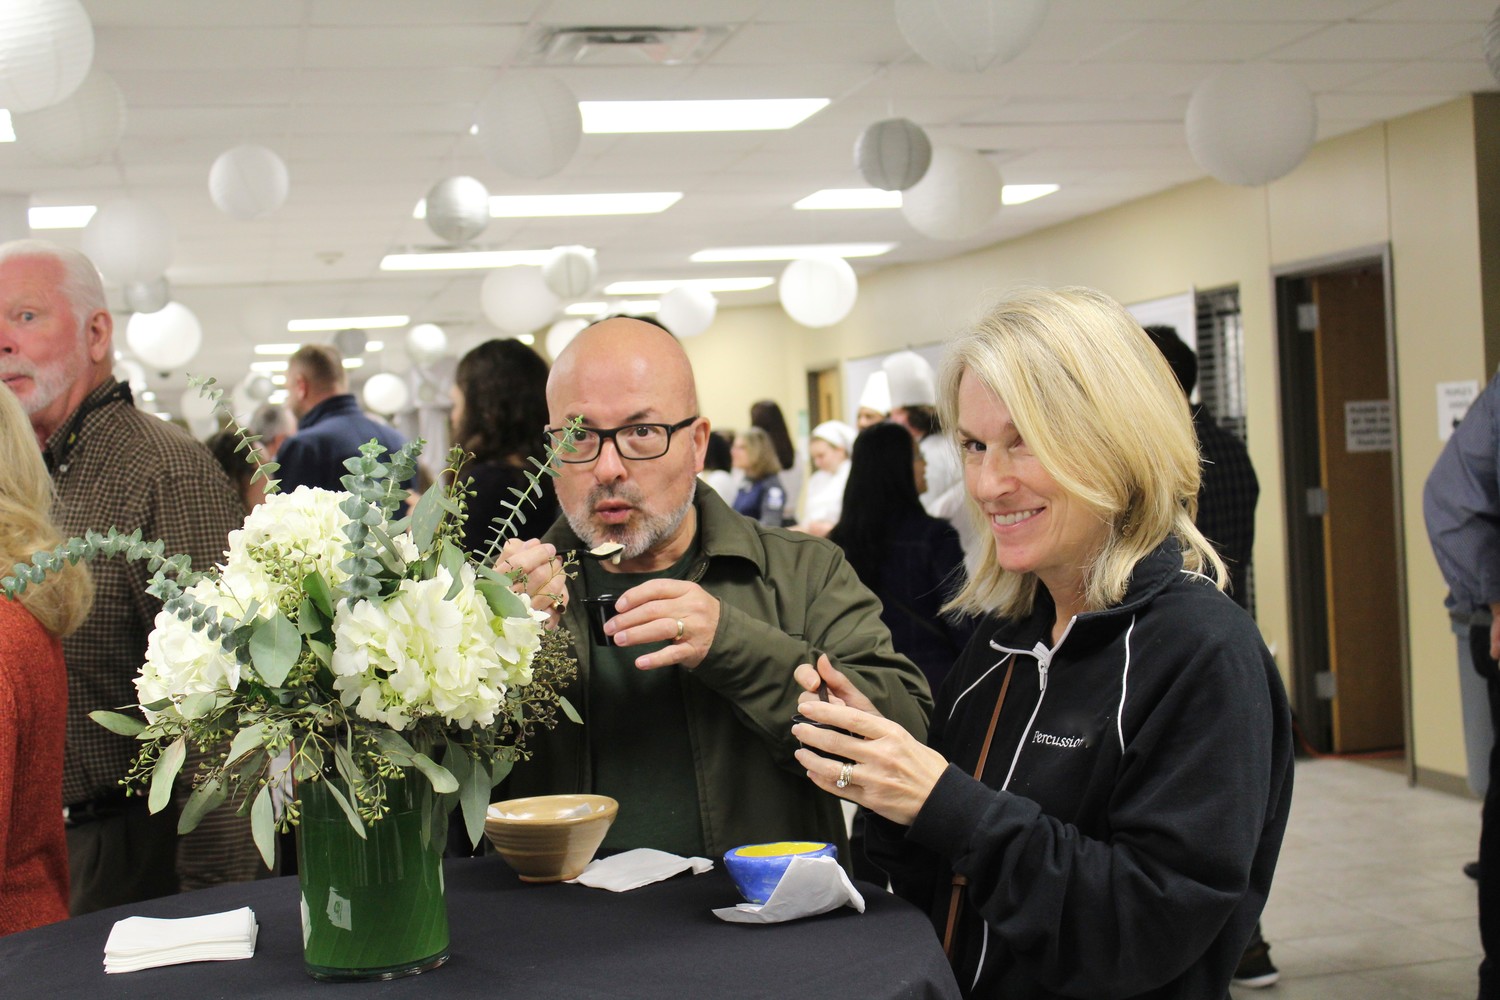 Guests sample the array of gourmet soups at the SOUPer Bowl at Nease High School. This year’s event is Jan. 31, from 6 to 8 p.m. at Nease. Tickets are $25 at studentstacklehunger.org.